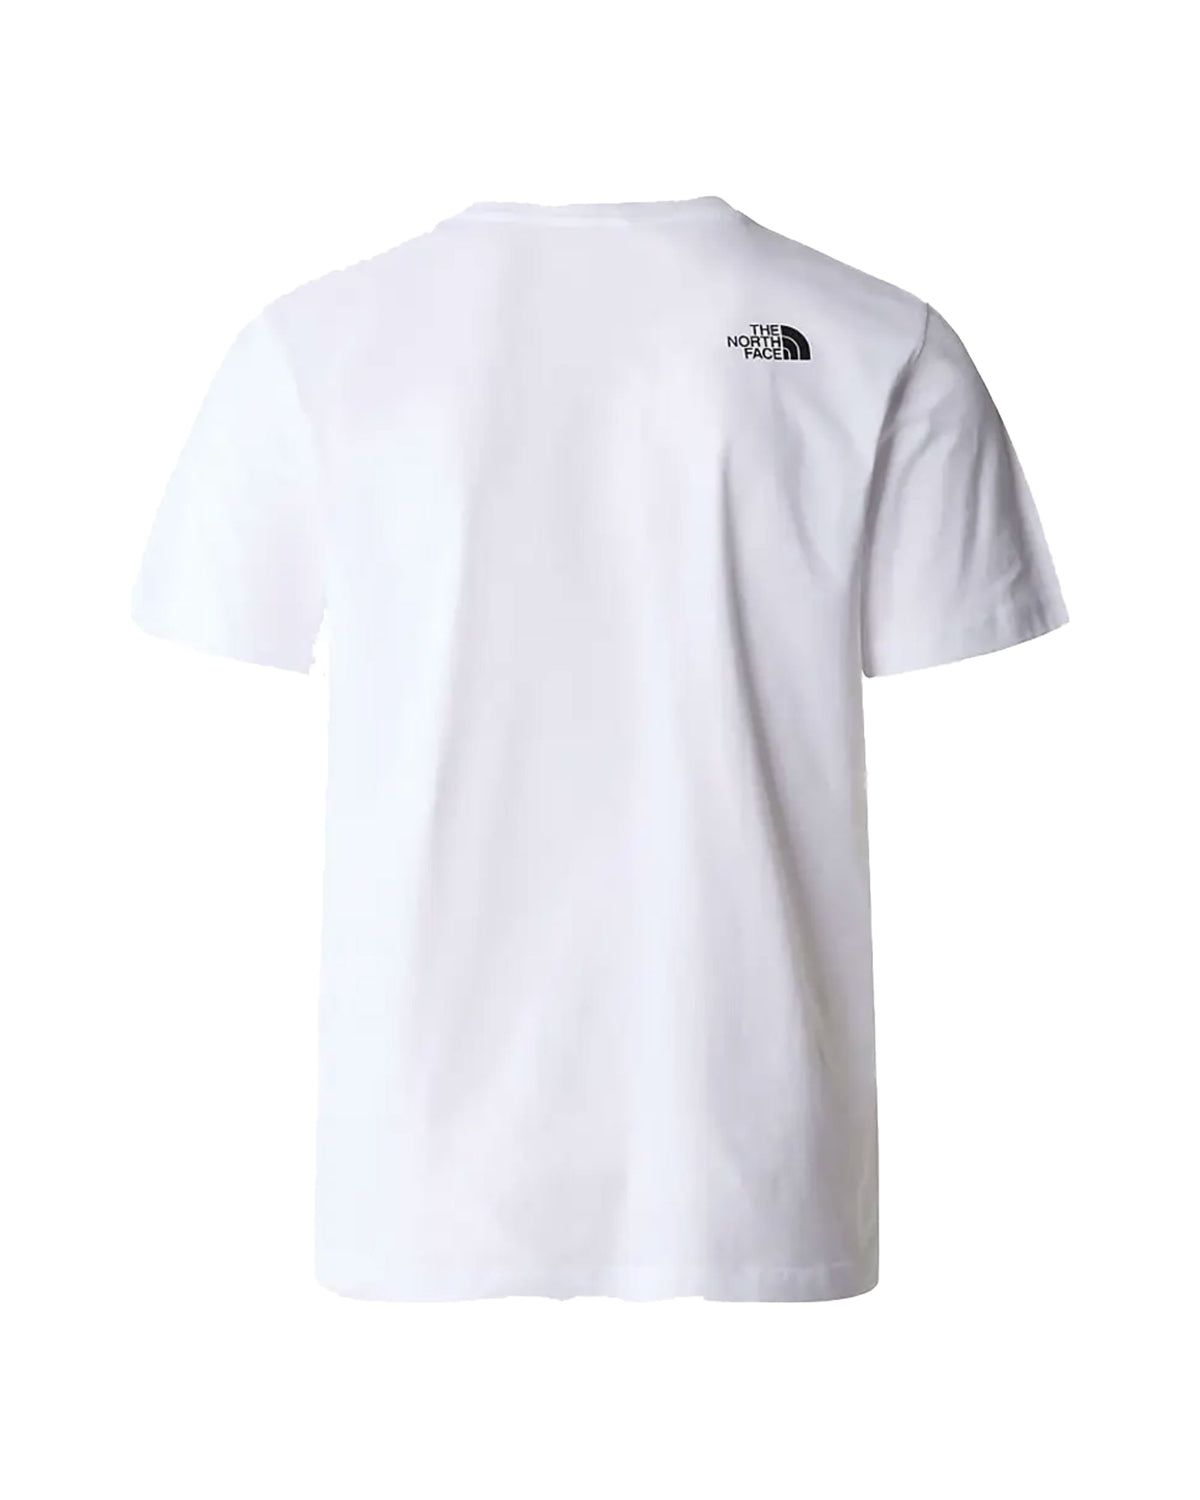 Man Tee The North Face Easy White